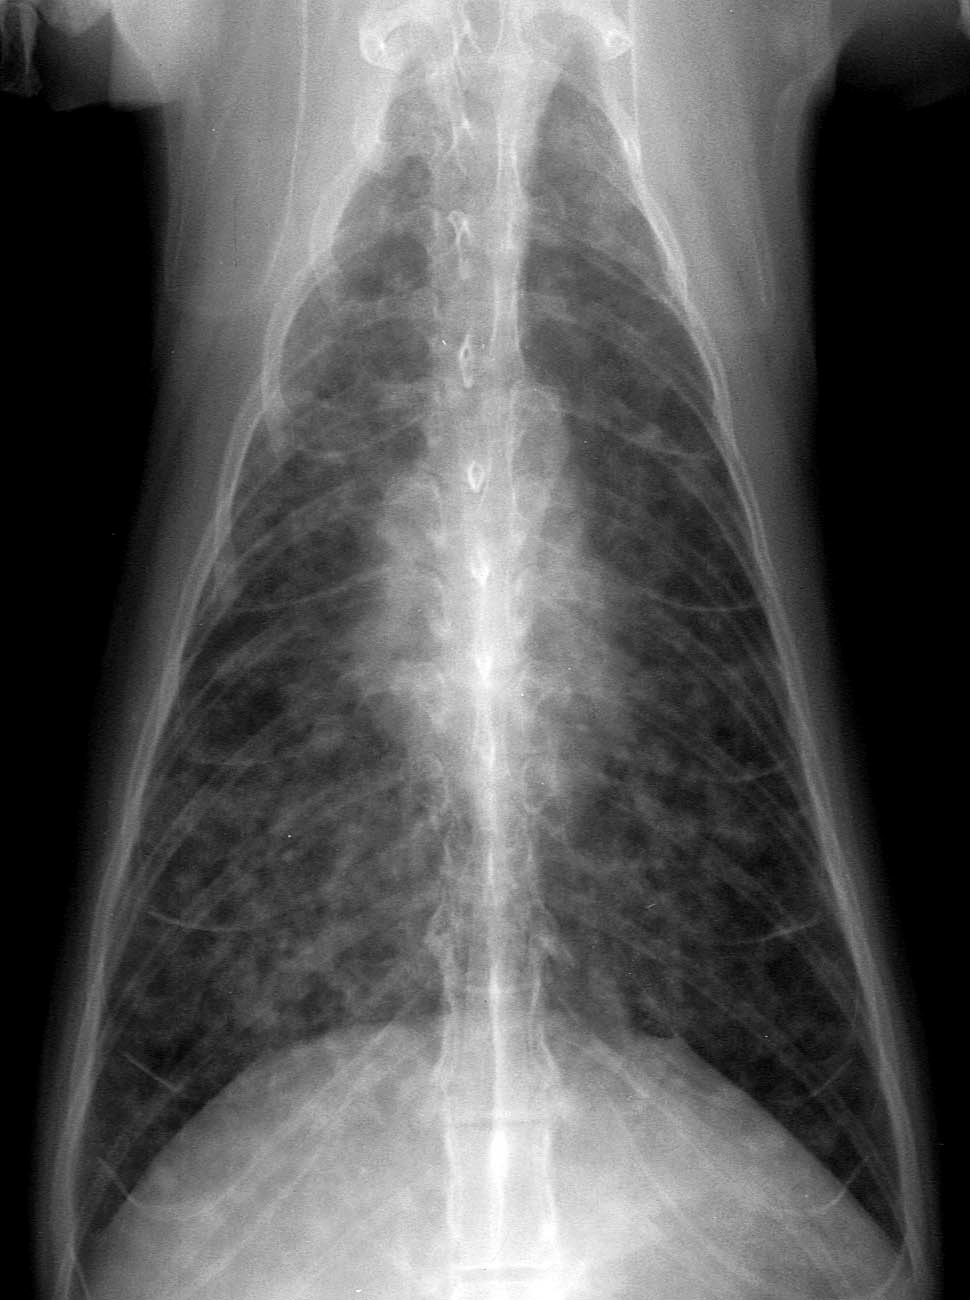 Fig. 1. pLCH - Thorax - Severe, diffuse broncho-interstitial infiltrative pattern throughout all lung lobes. 